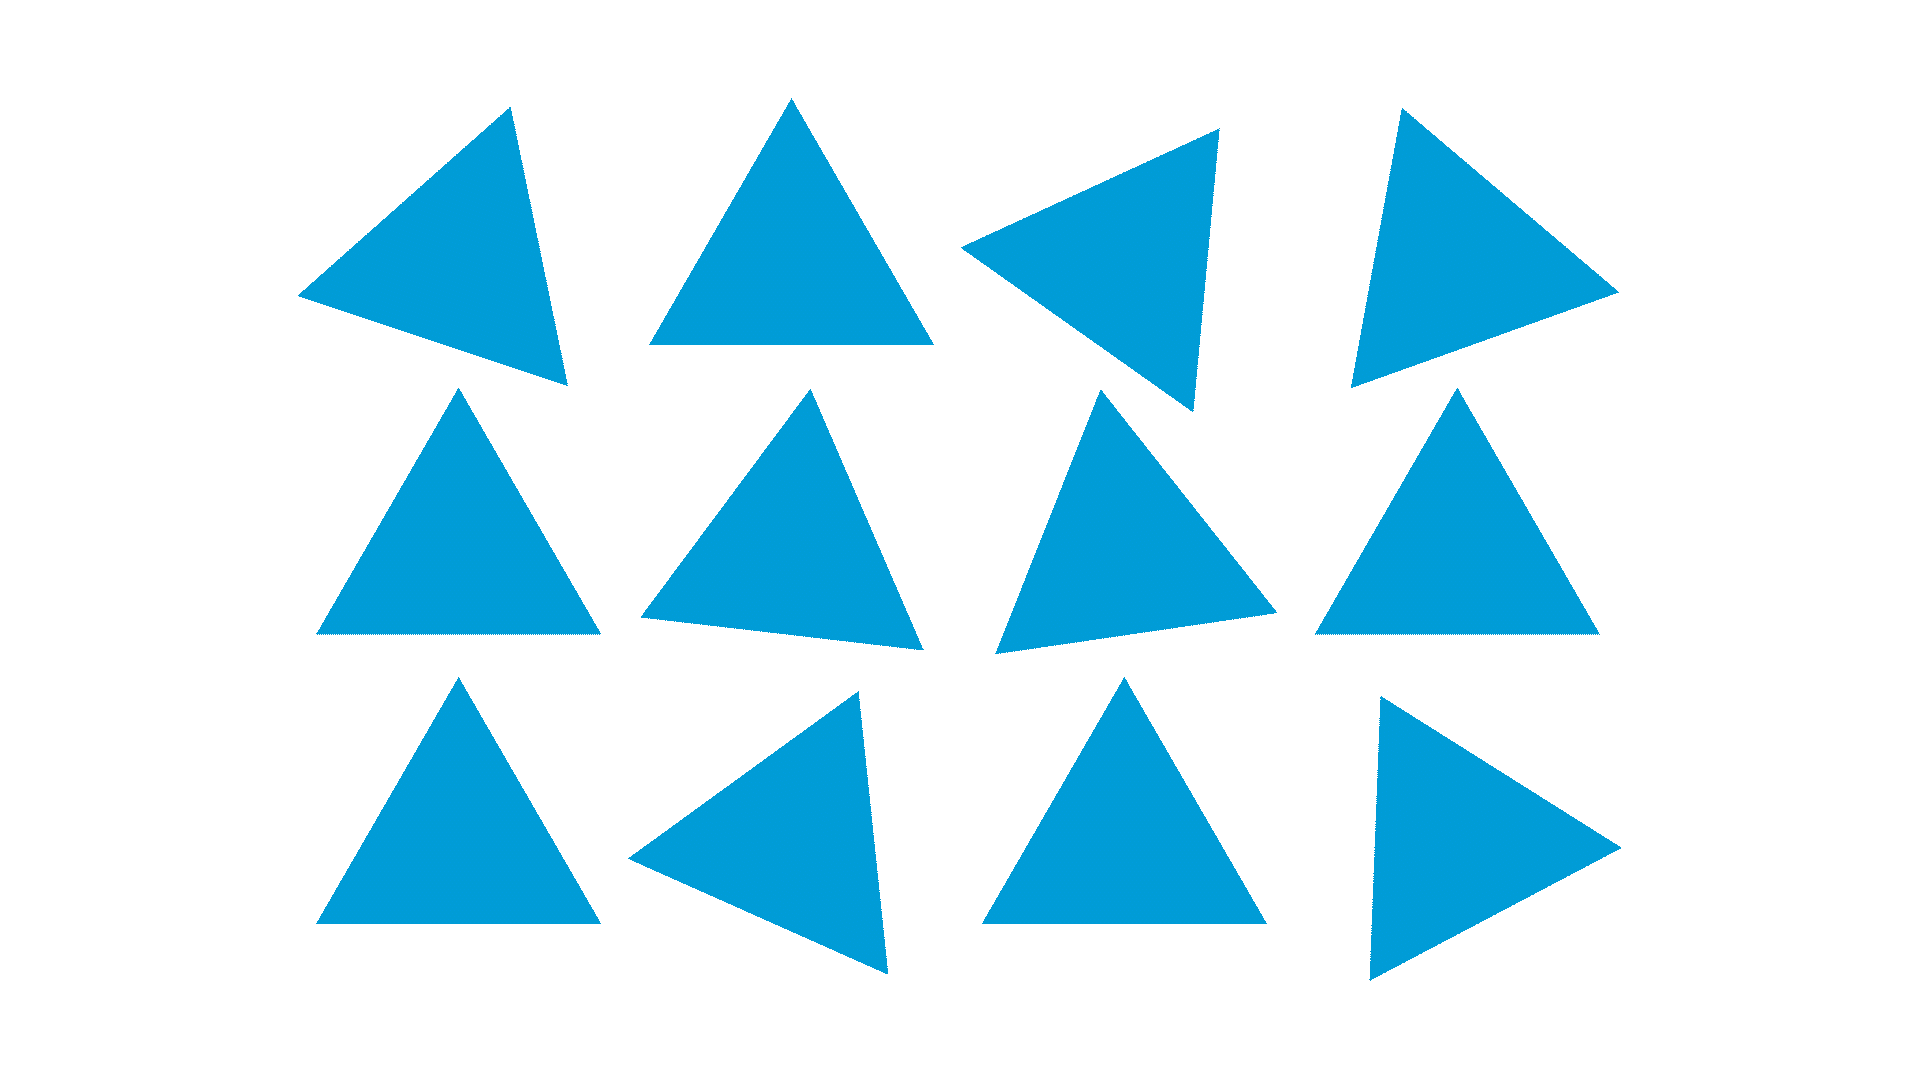 12 blue triangles become randomly connected by a thin blue line as the animation progresses.